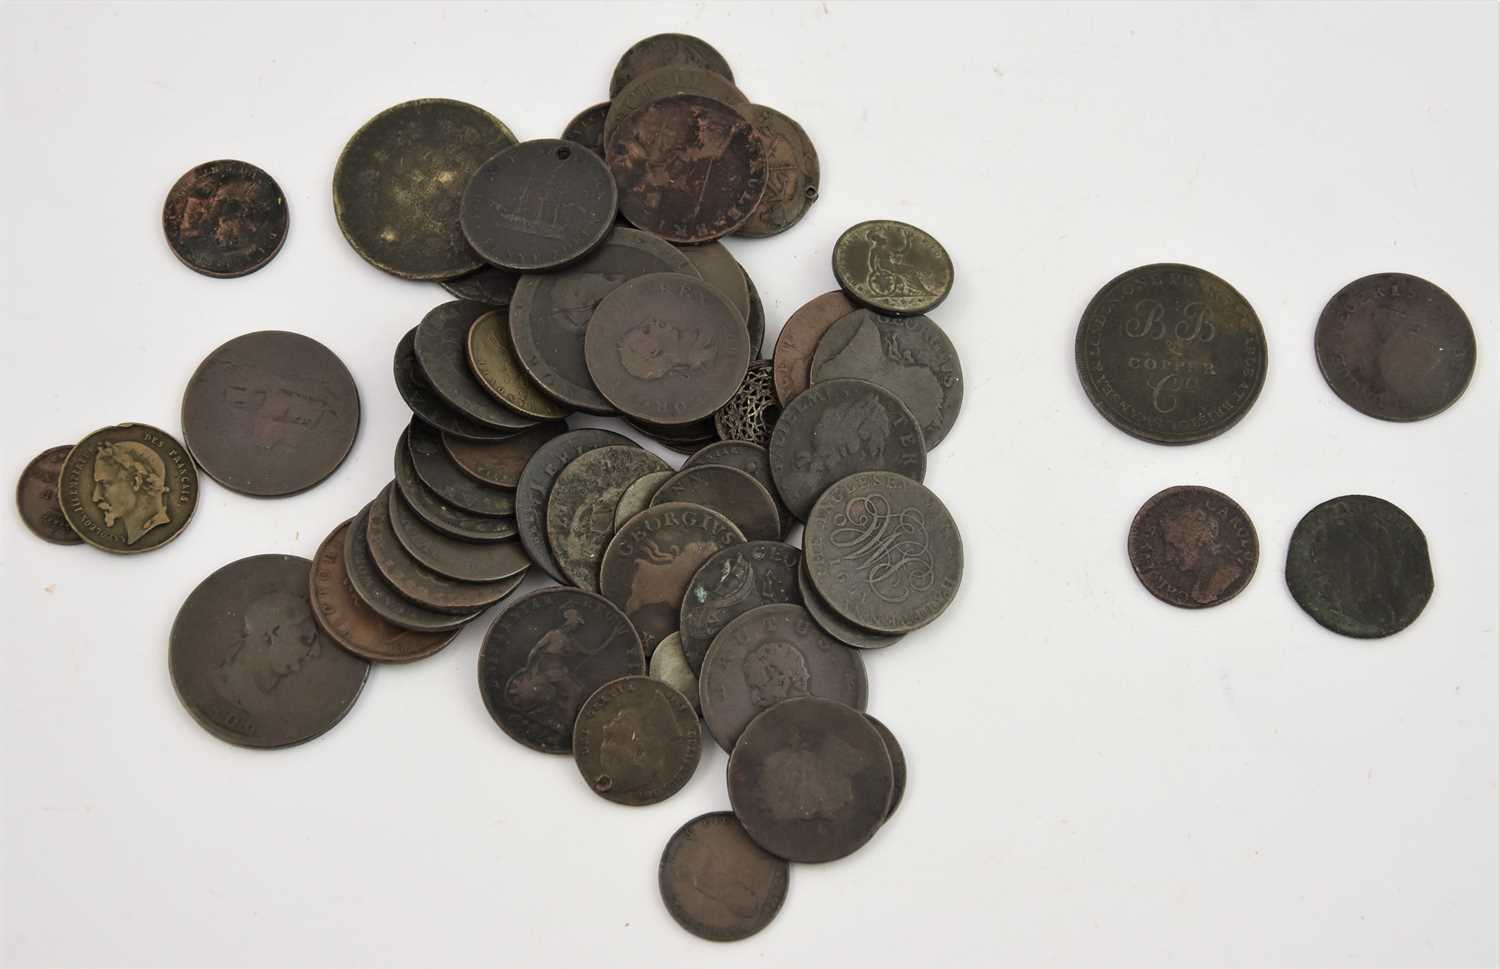 Mixed Copper Coinage & Tokens, mostly 18th and 19th century with some earlier examples, highlights